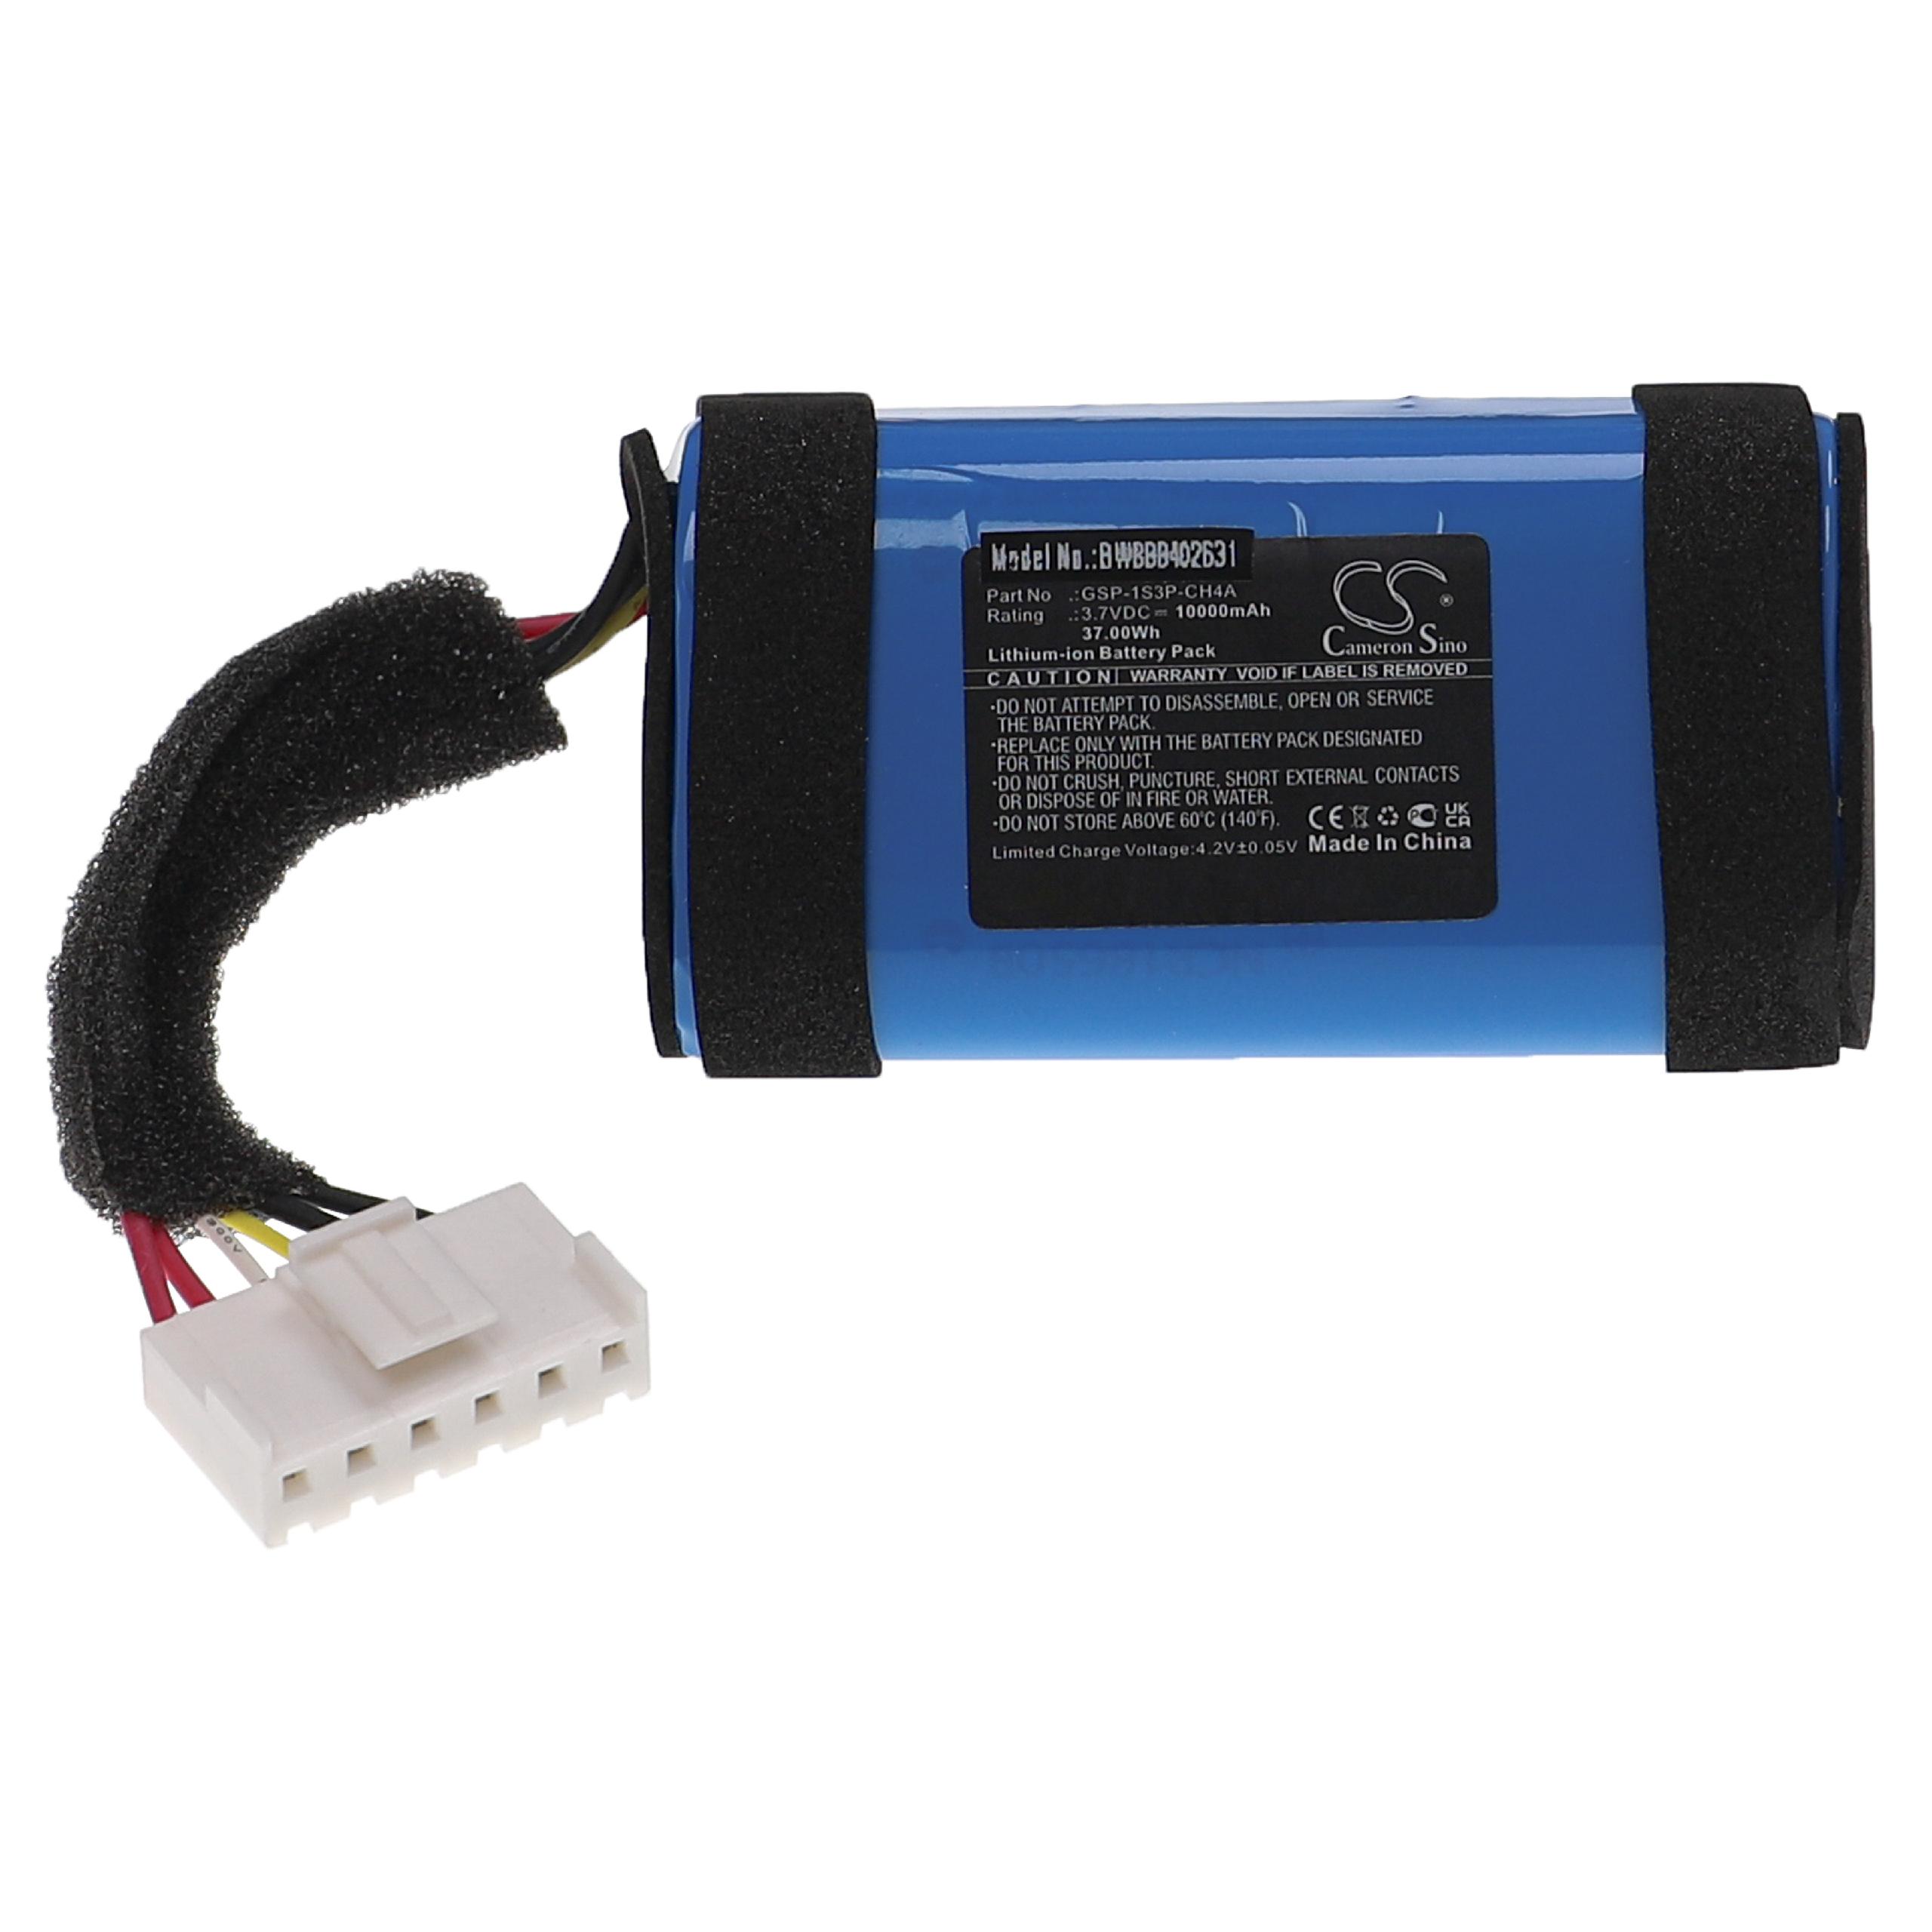  Battery replaces JBL 1AA011NA, GSP-1S3P-CH4A for JBLLoudspeaker - Li-Ion 10000 mAh 1 cell